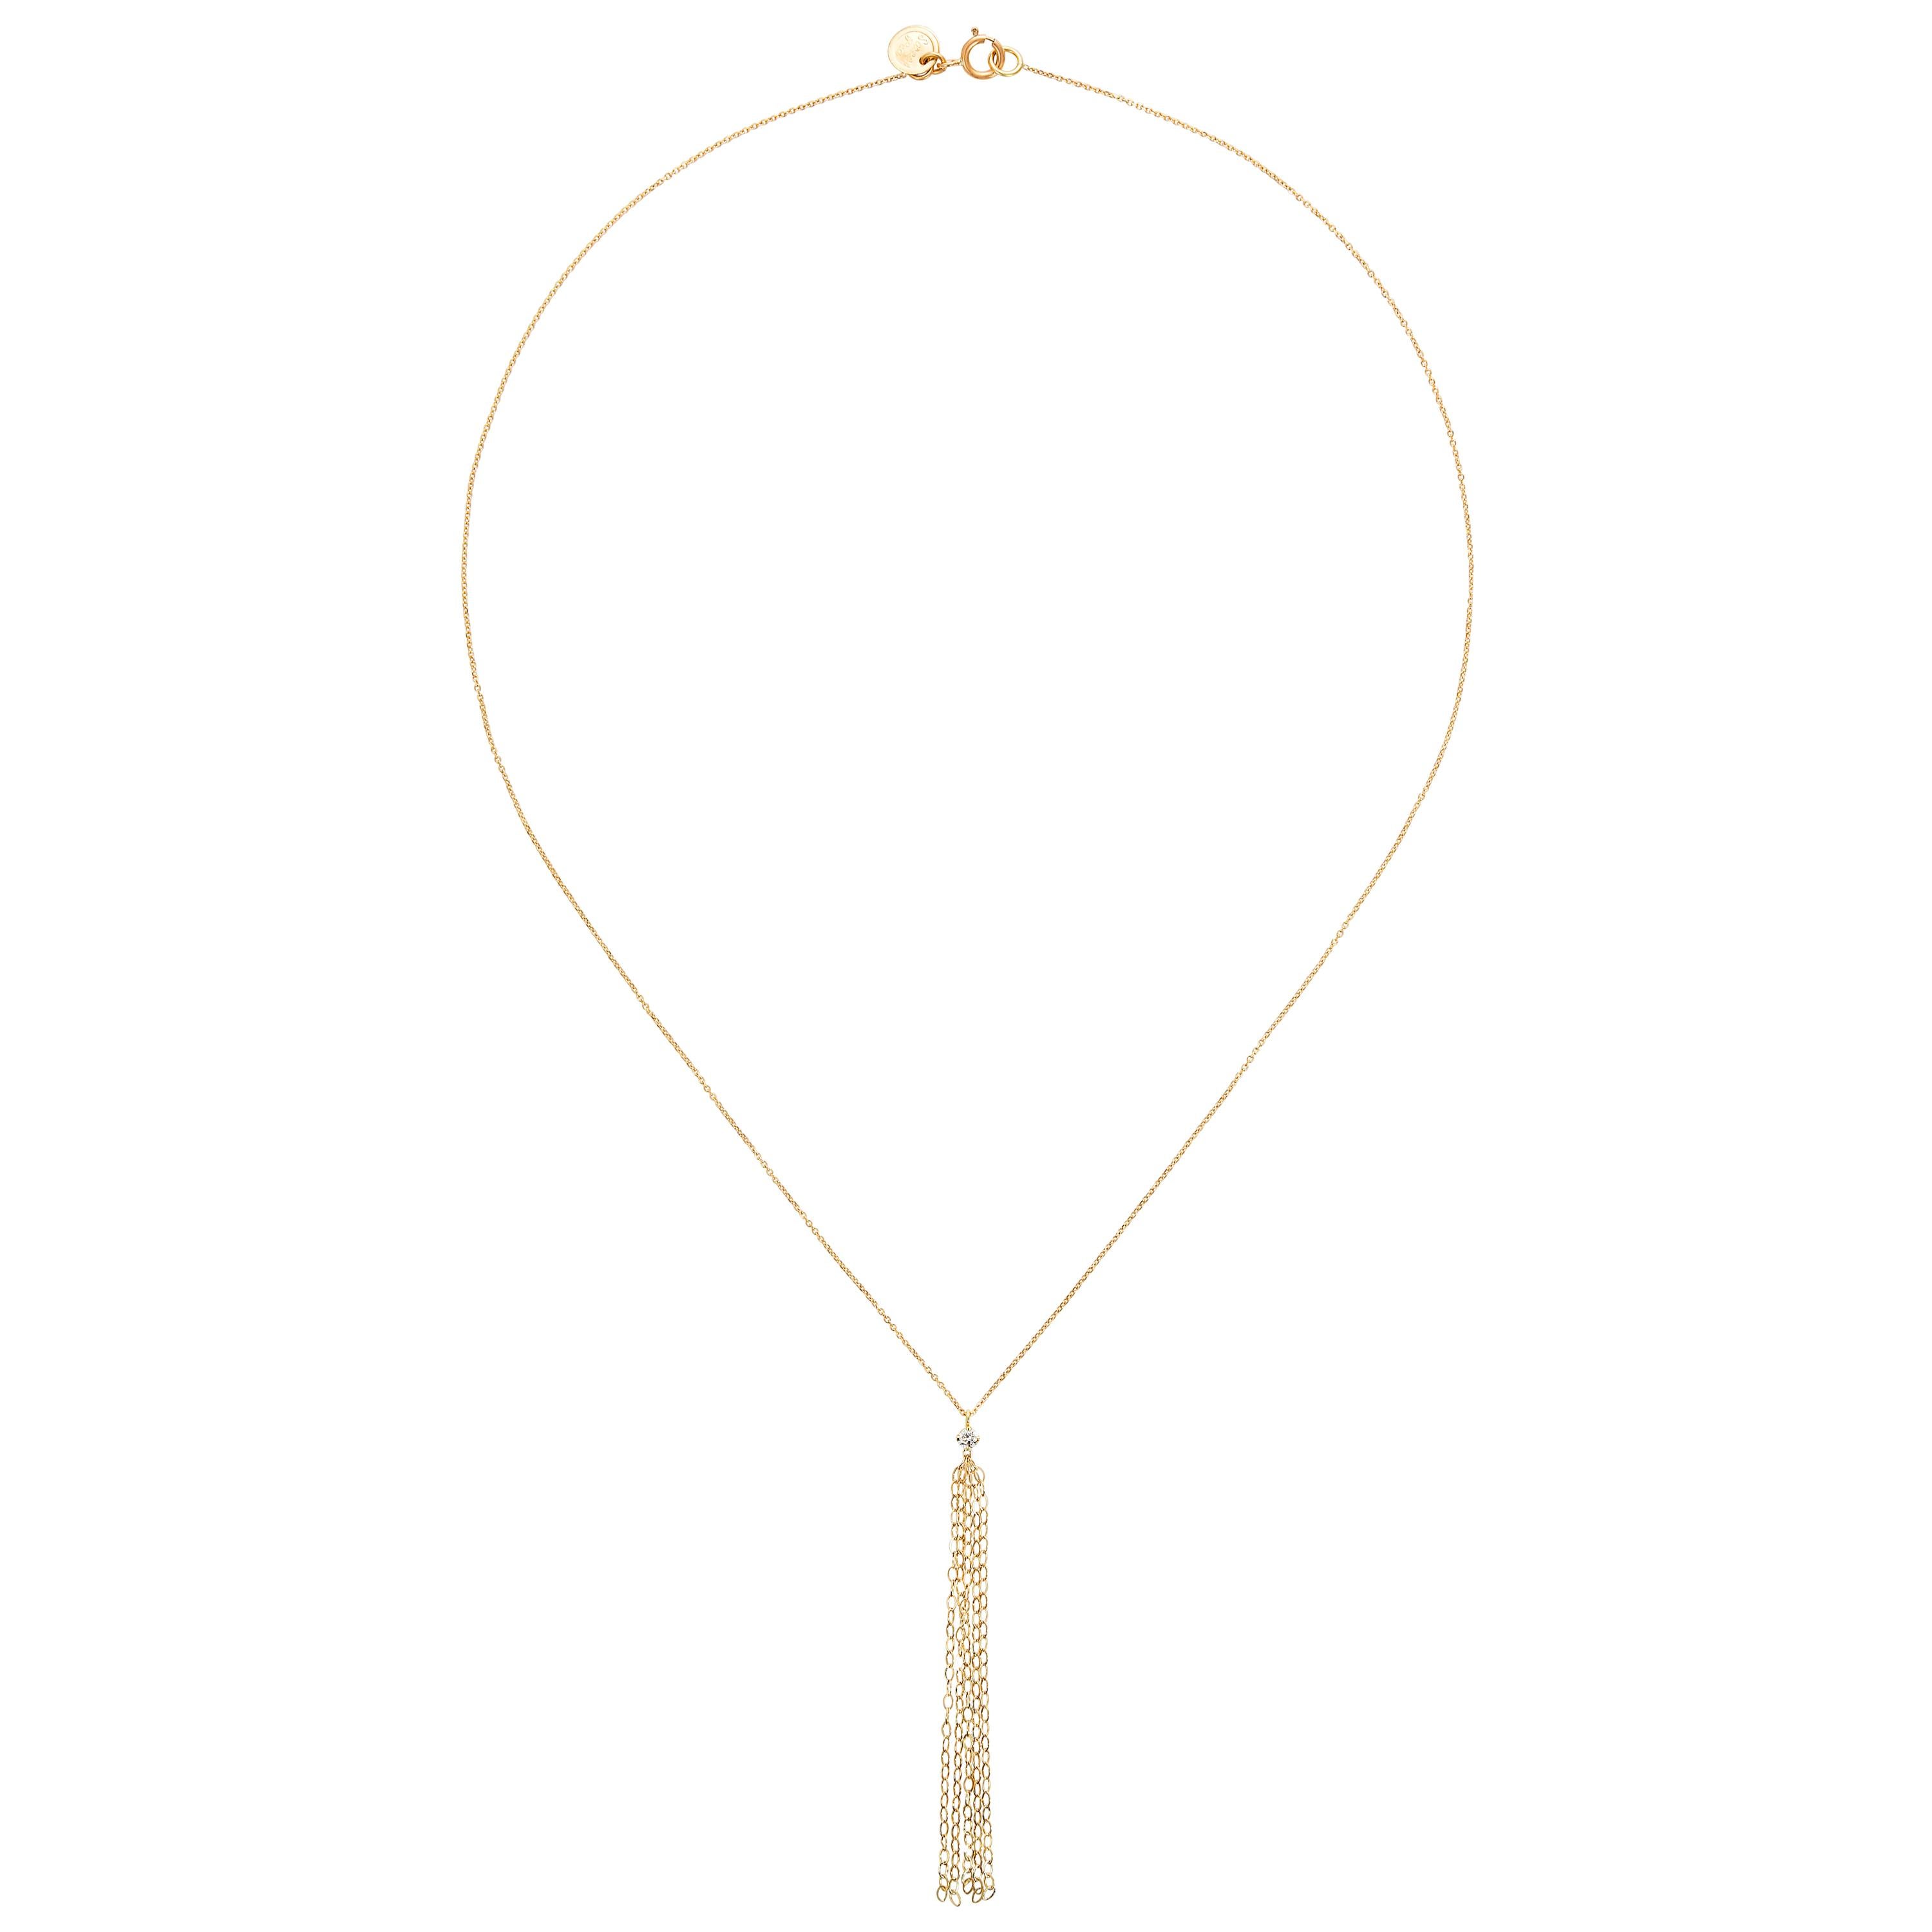 Gold Tassel 18 Karat Yellow Gold and Diamond Necklace with Chain Drop